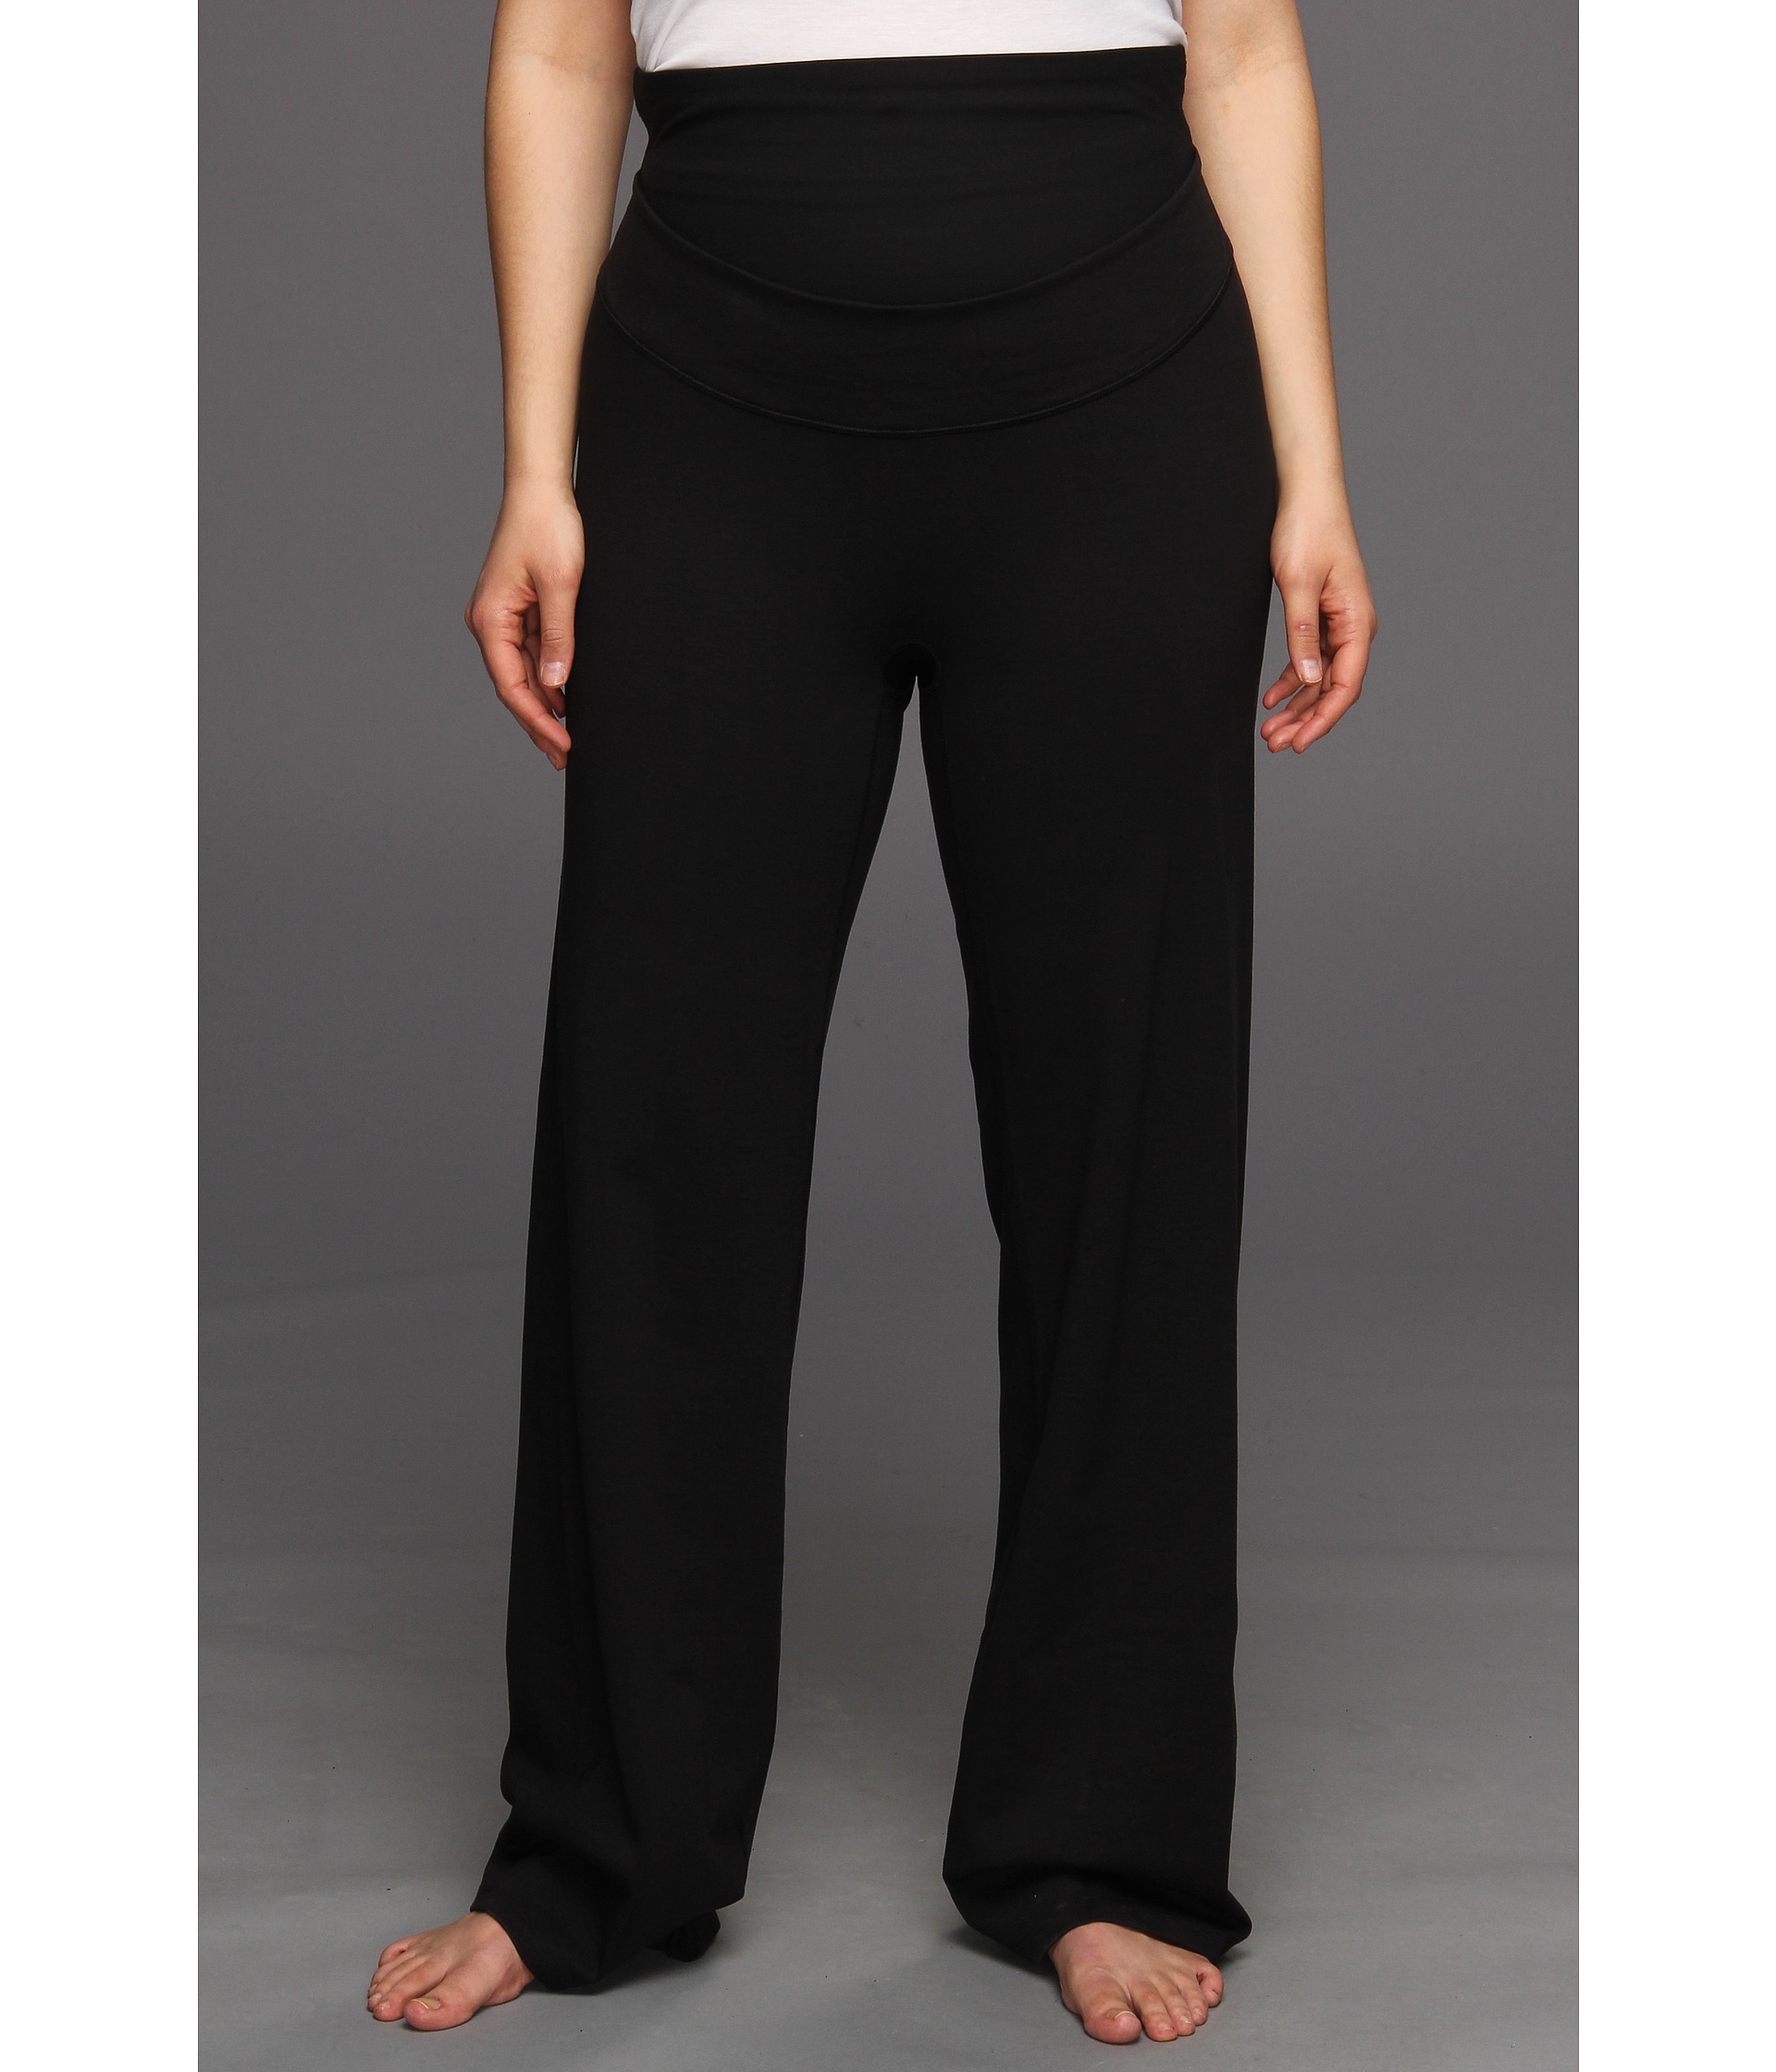 Spanx Active Plus Size Power Pant - Zappos.com Free Shipping BOTH Ways